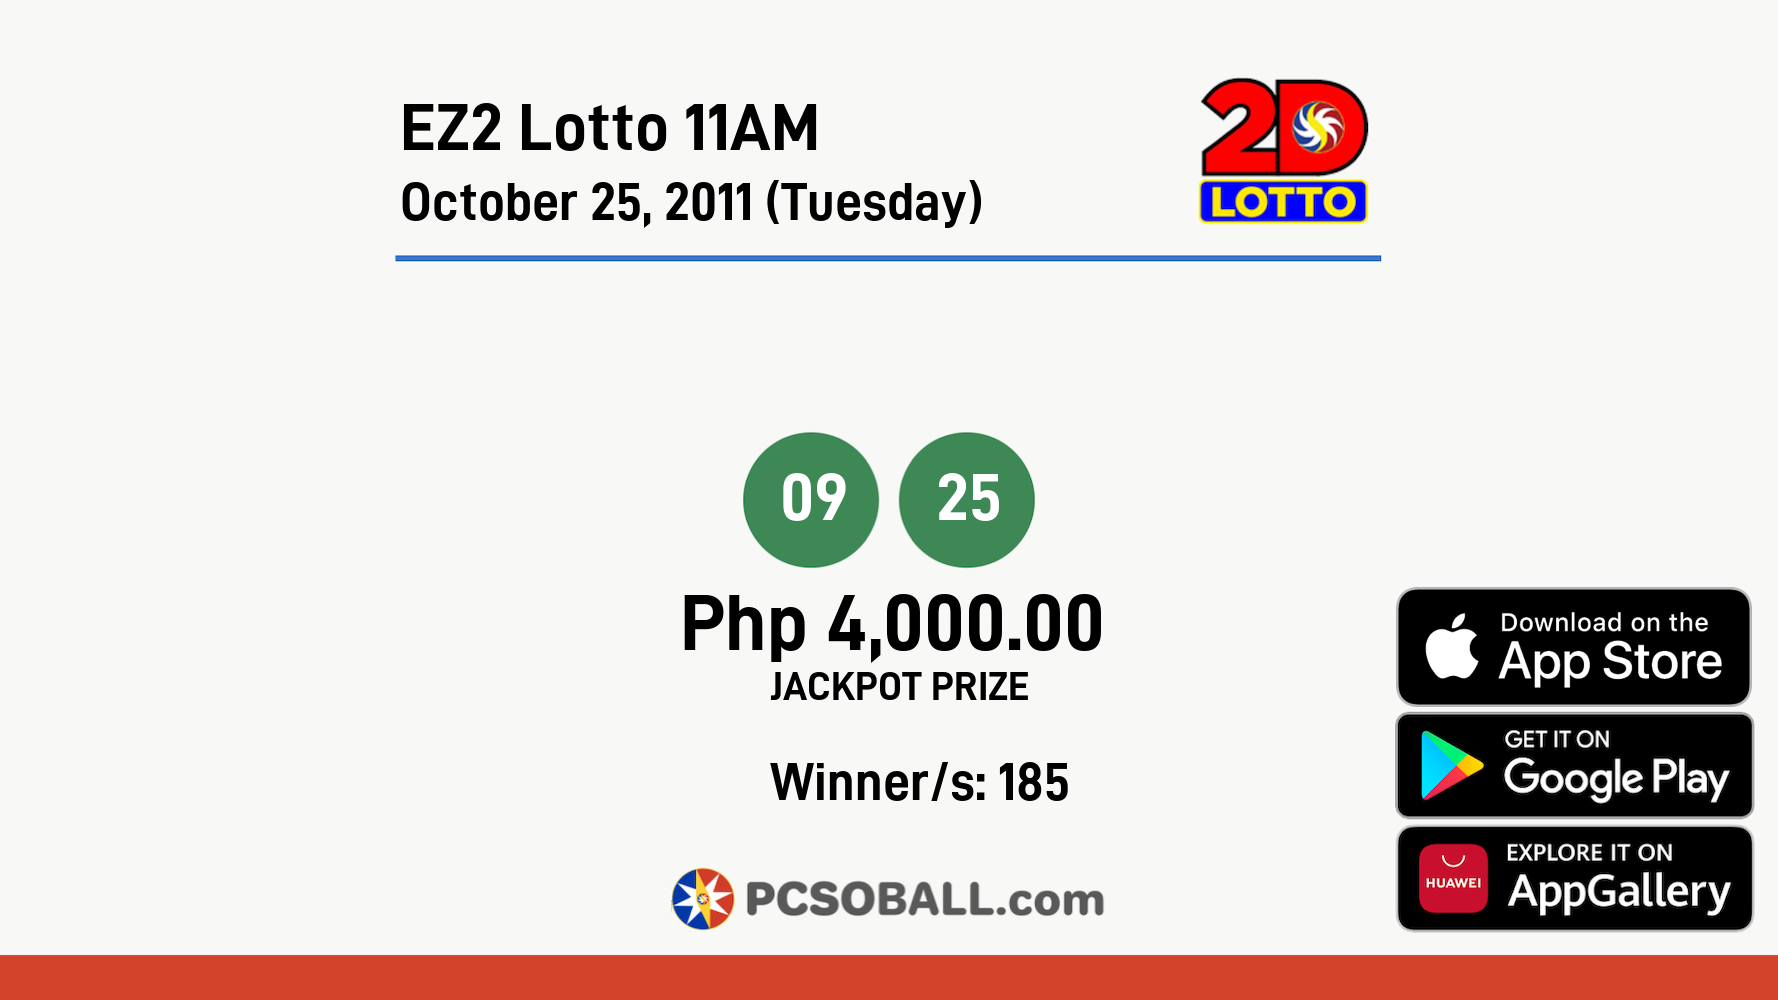 EZ2 Lotto 11AM October 25, 2011 (Tuesday) Result